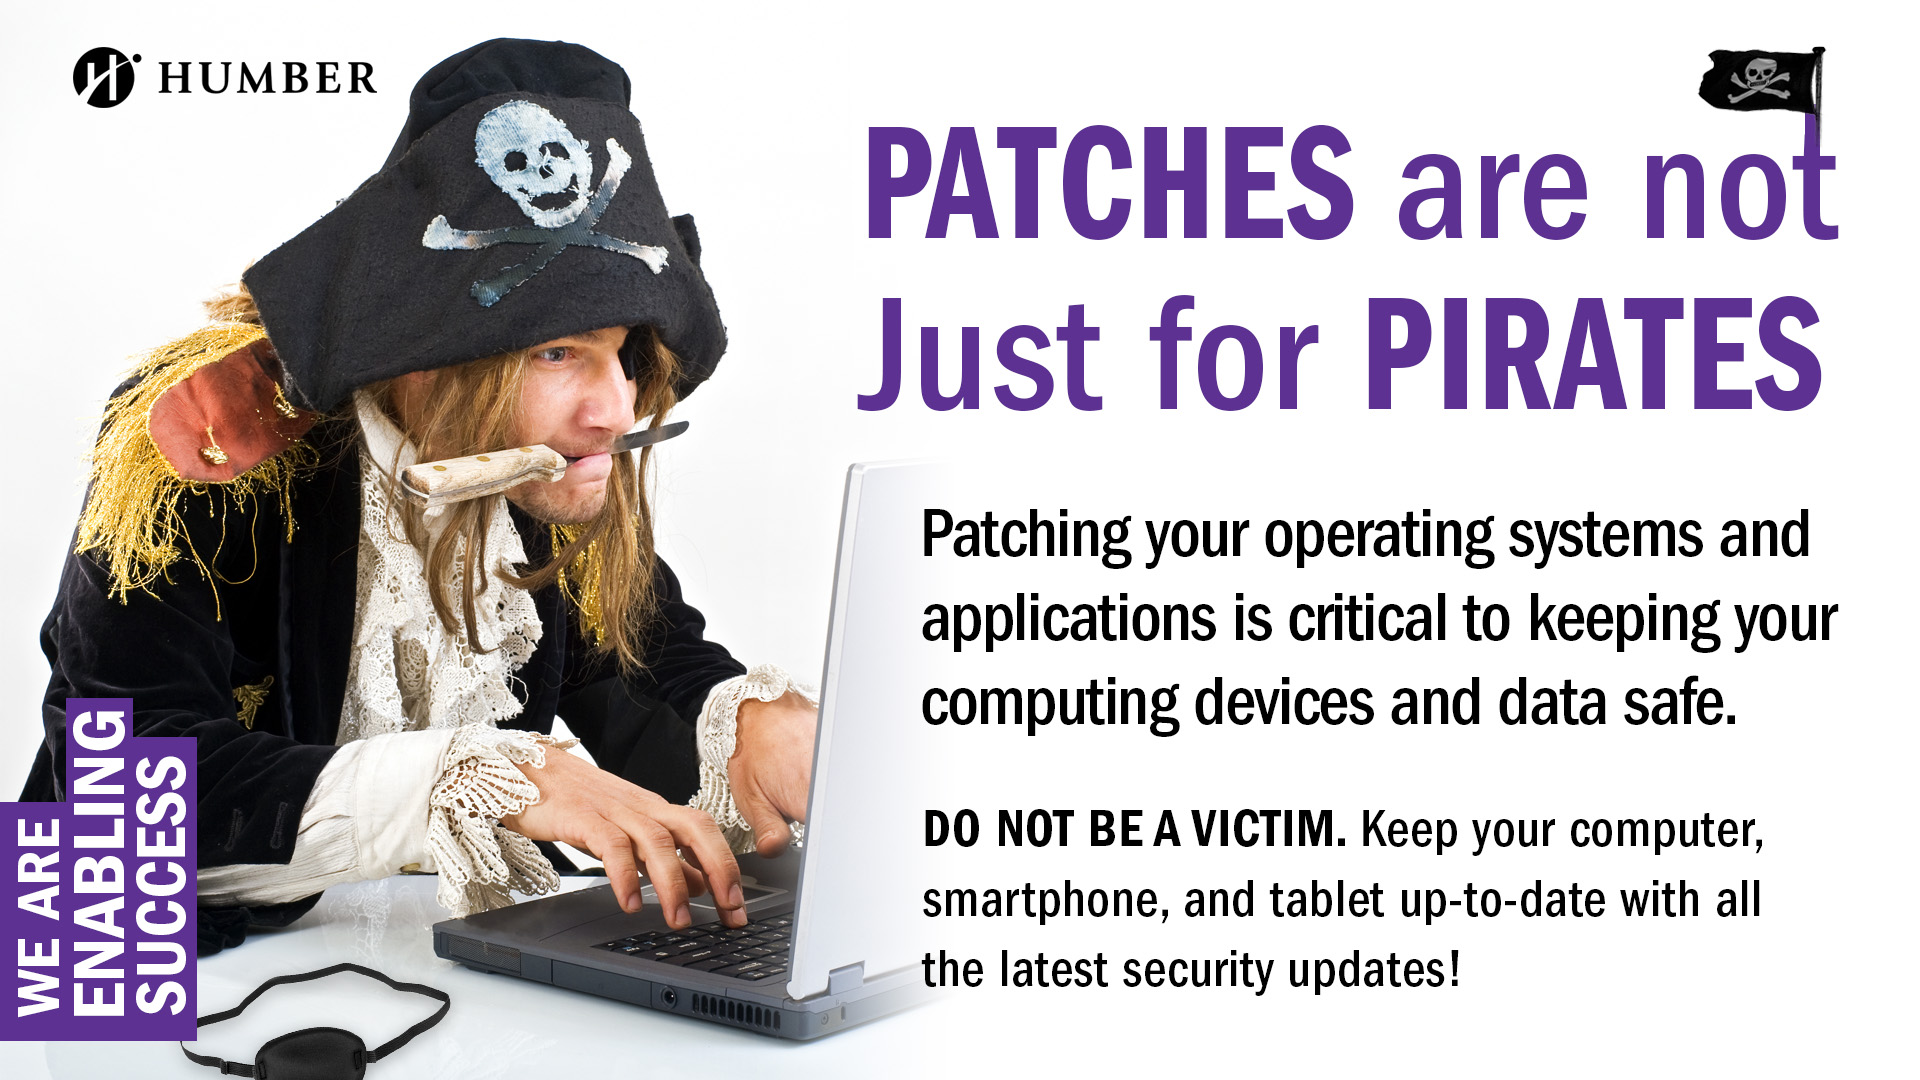 PATCHES are not Just for PIRATES Anymore